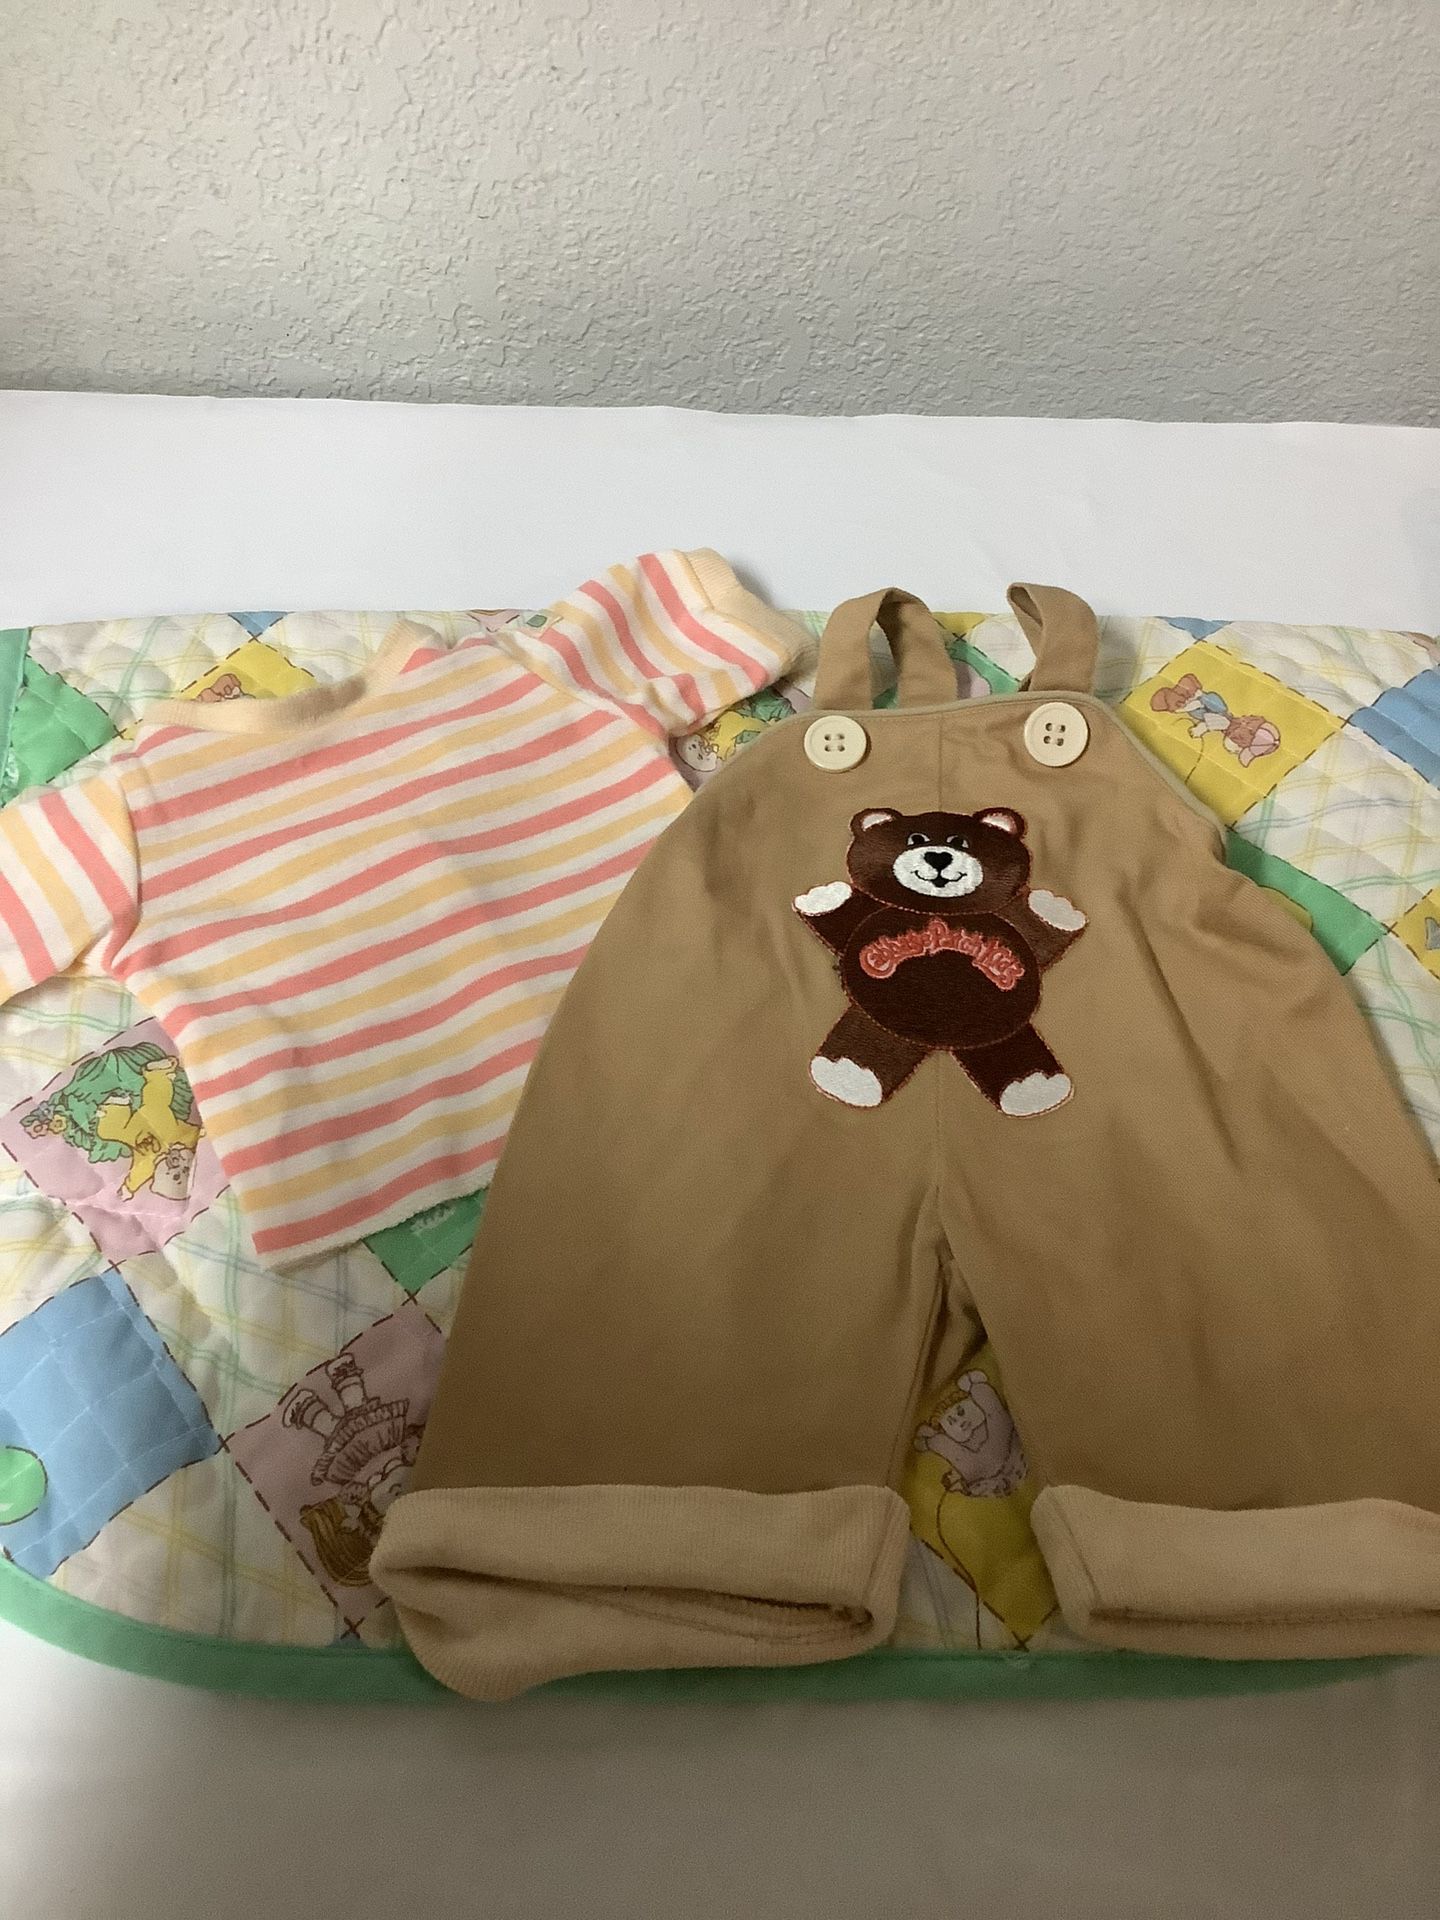 Vintage Cabbage Patch Kids Teddy Bear Overalls & Matching Shirt 